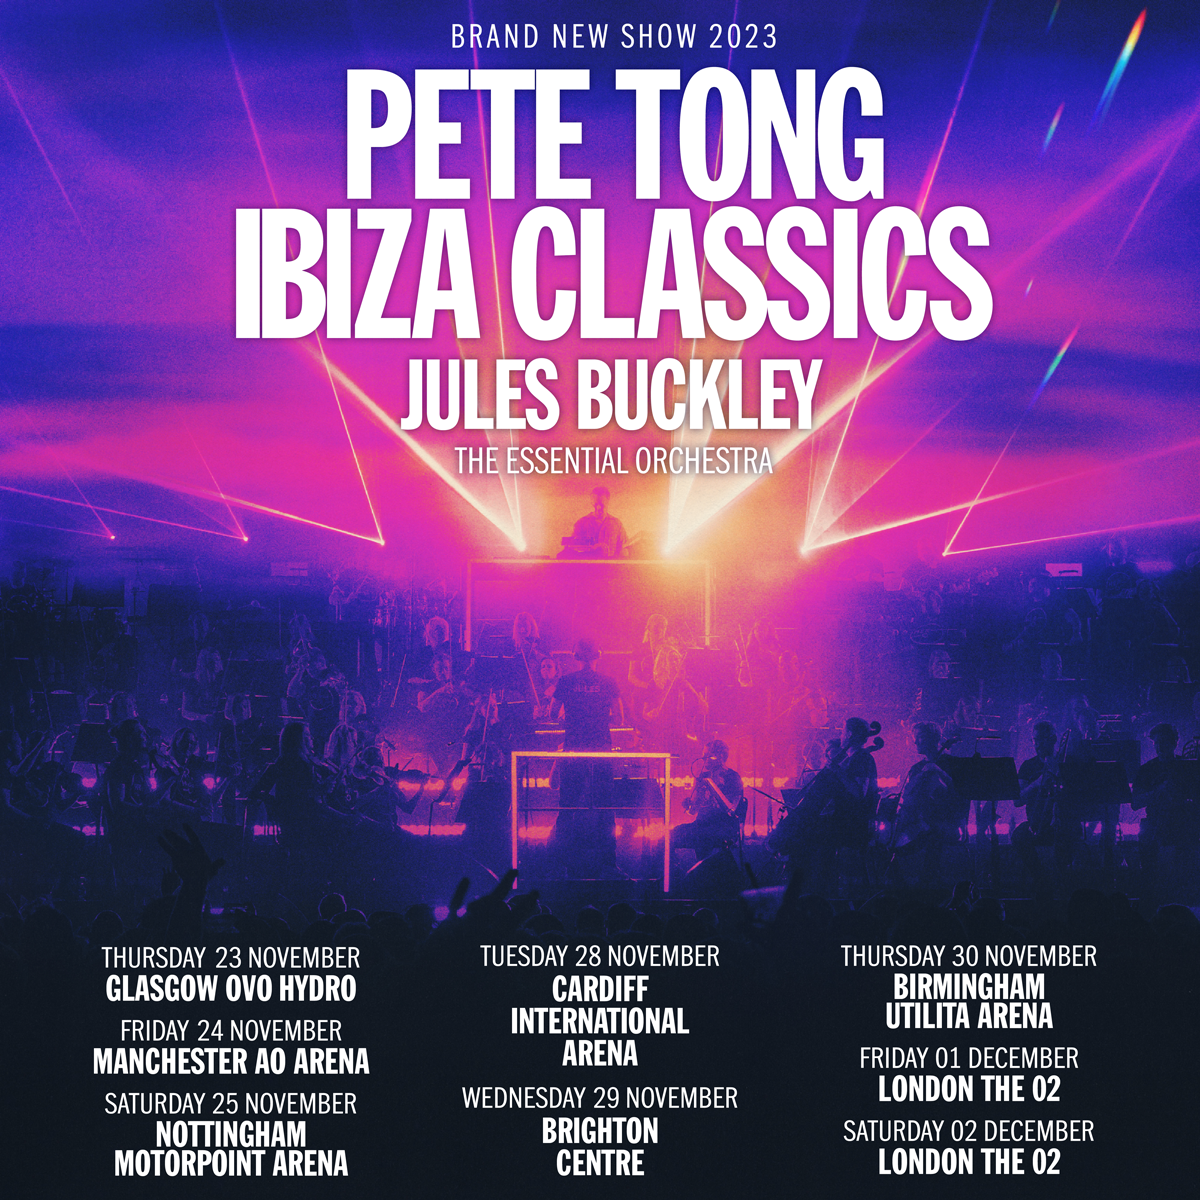 PETE TONG IBIZA CLASSICS – BRAND NEW SHOW FOR 2023 ANNOUNCED